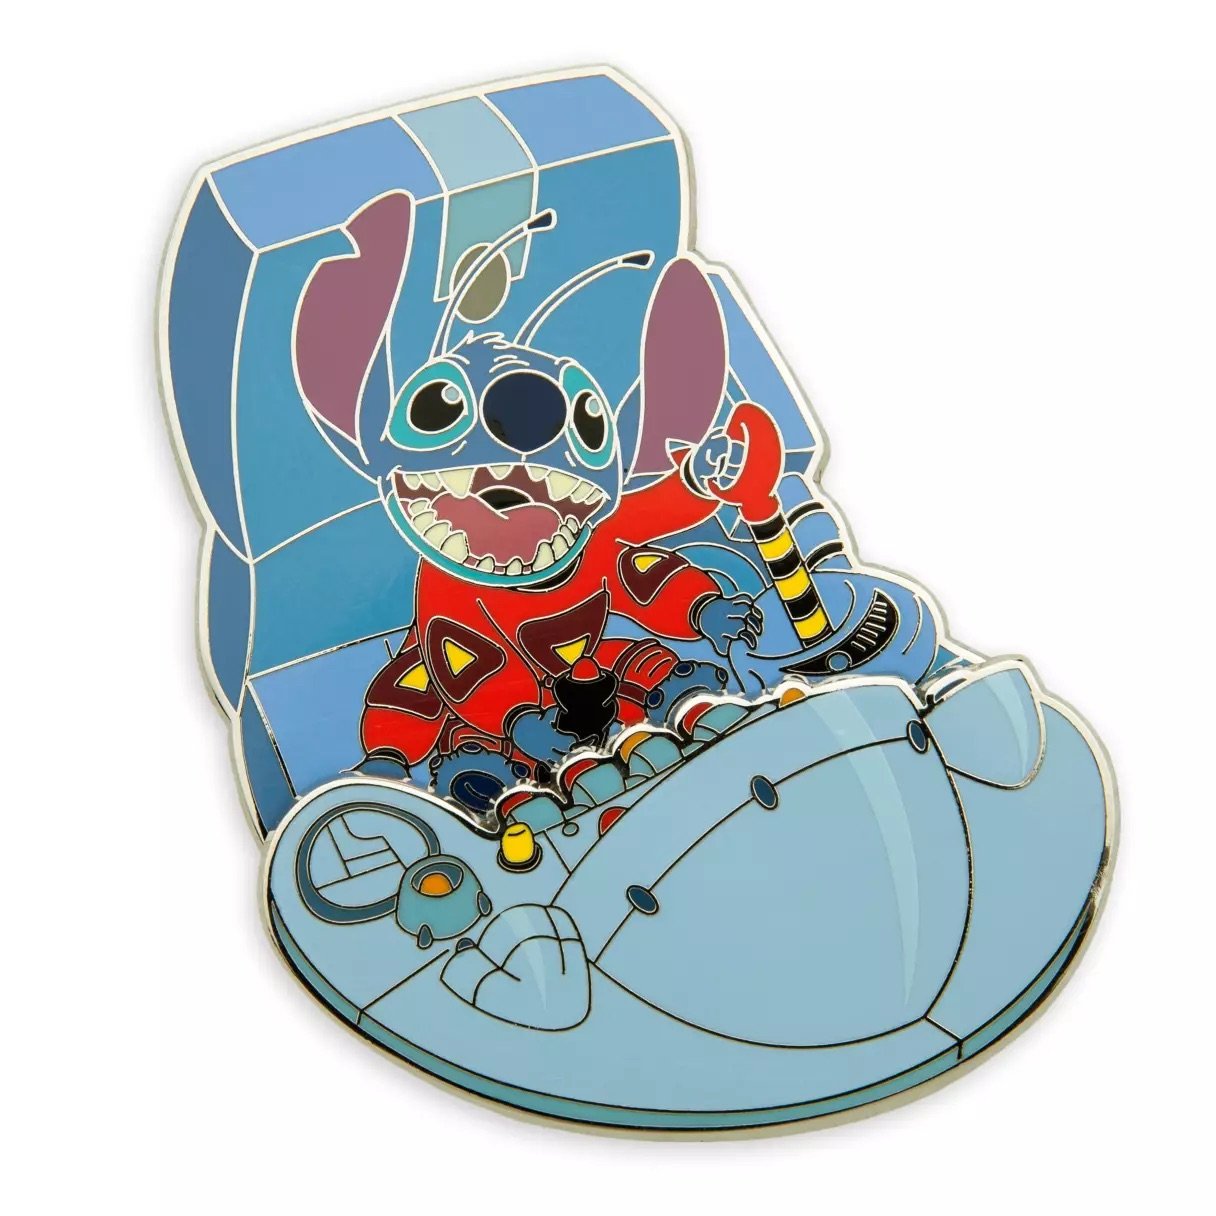 Disney's 626 Stitch Thermos Collectible Pin / Pinback / Lapel Only